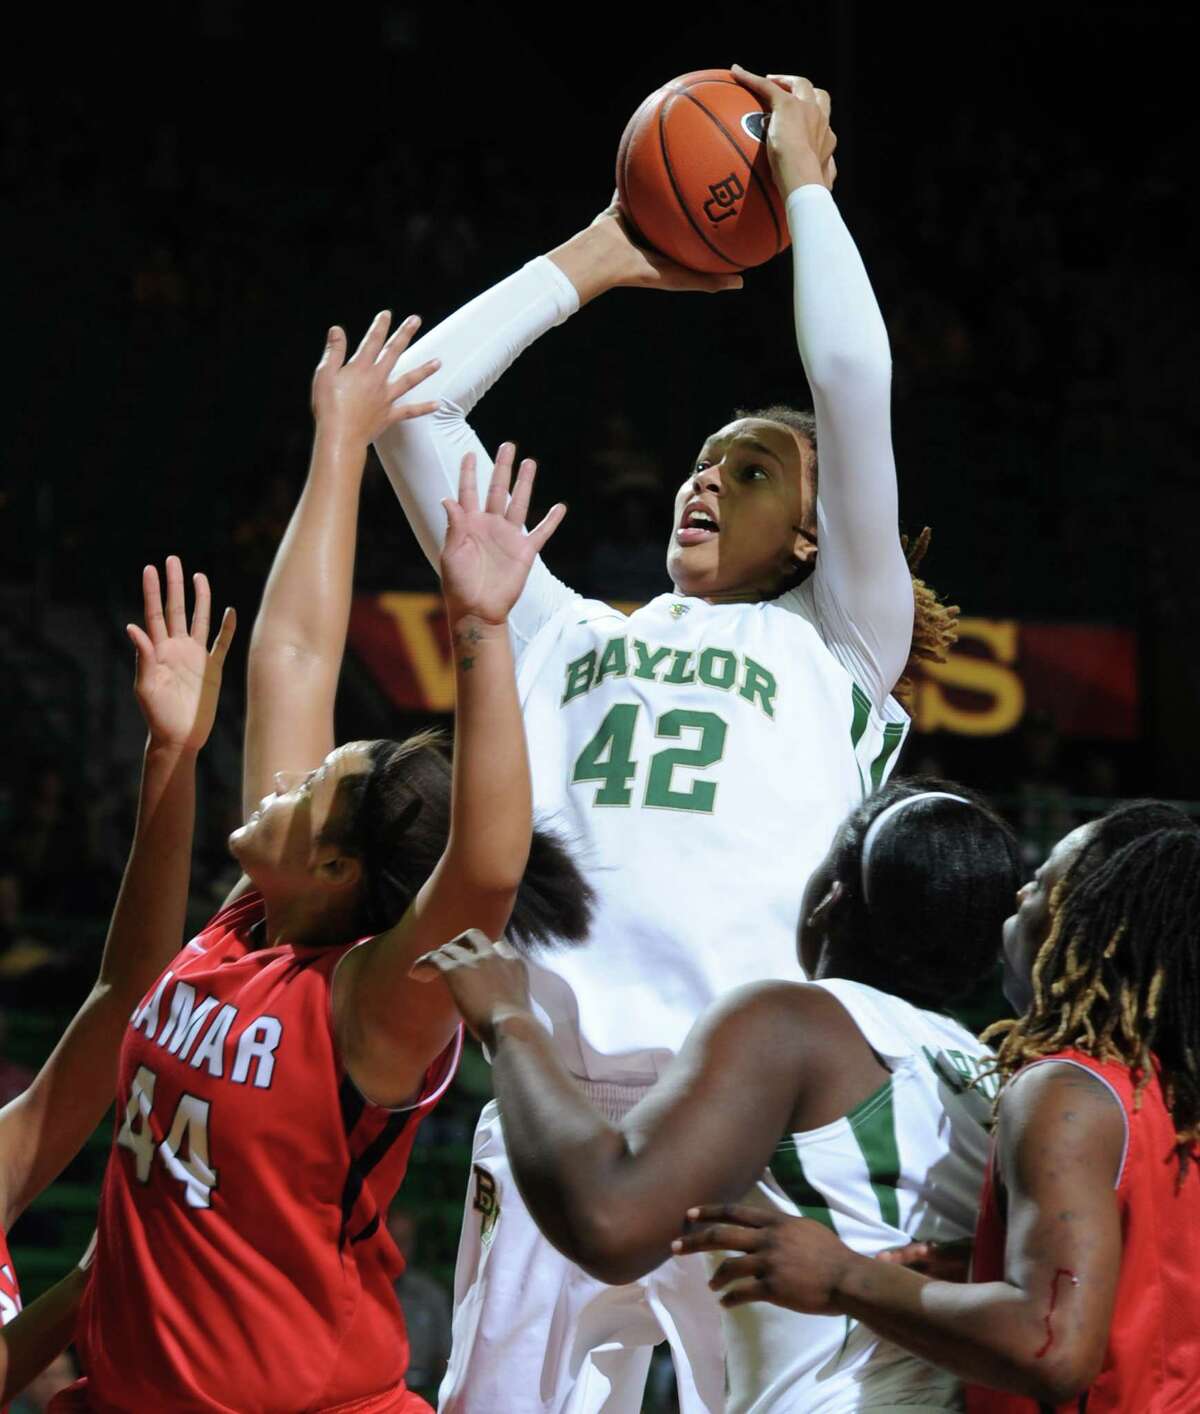 Baylor's Brittney Griner (42) shoots over Lamar's Kristina Higgins, left, during the second half of an NCAA college basketball game, Friday, Nov. 9, 2012, in Waco, Texas. Baylor won 80-34. (AP Photo/Waco Tribune Herald, Rod Aydelotte)